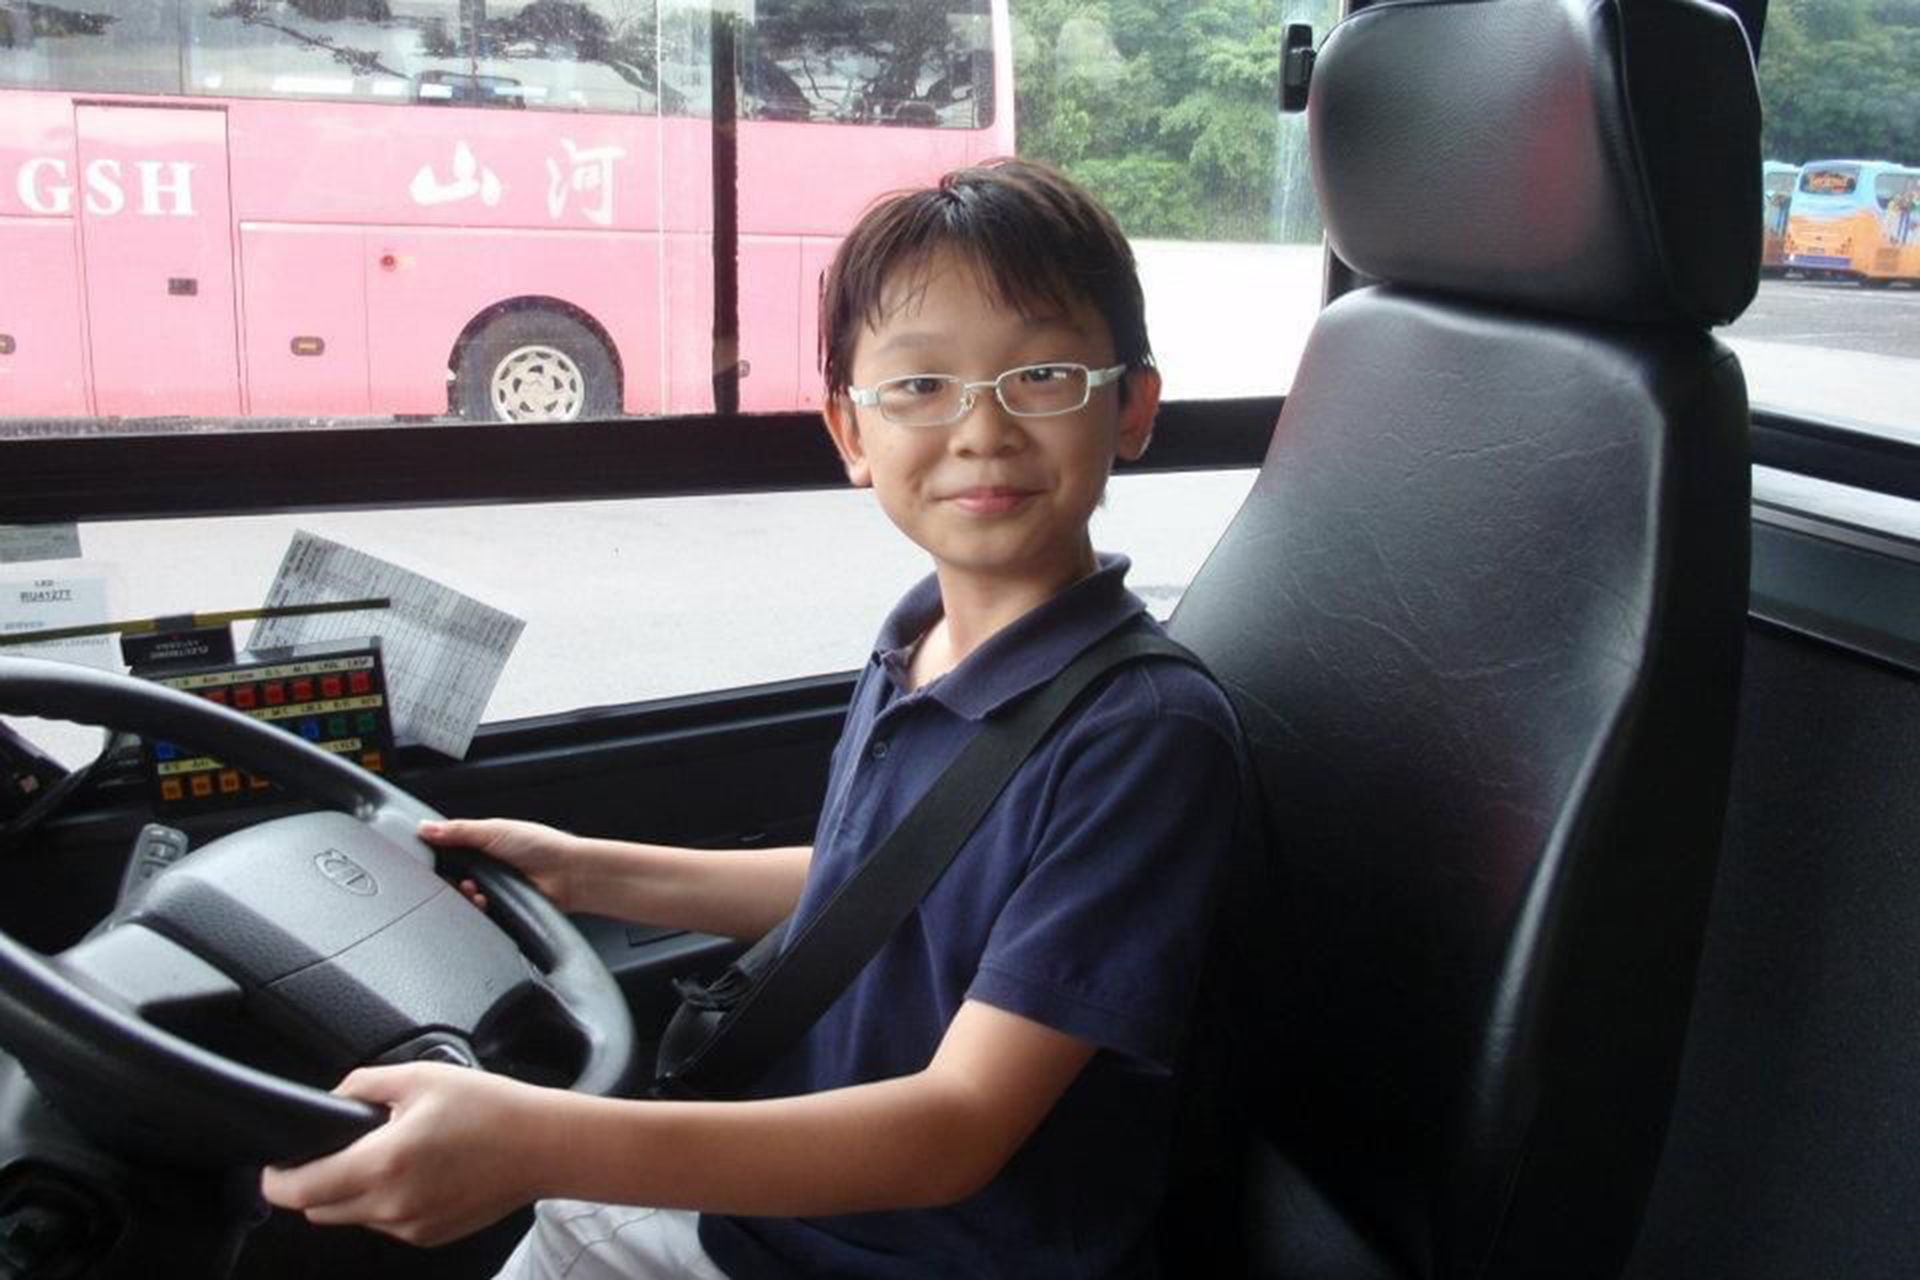 12-year-old Matthew Tay on a bus in Sentosa during an outing in 2011.